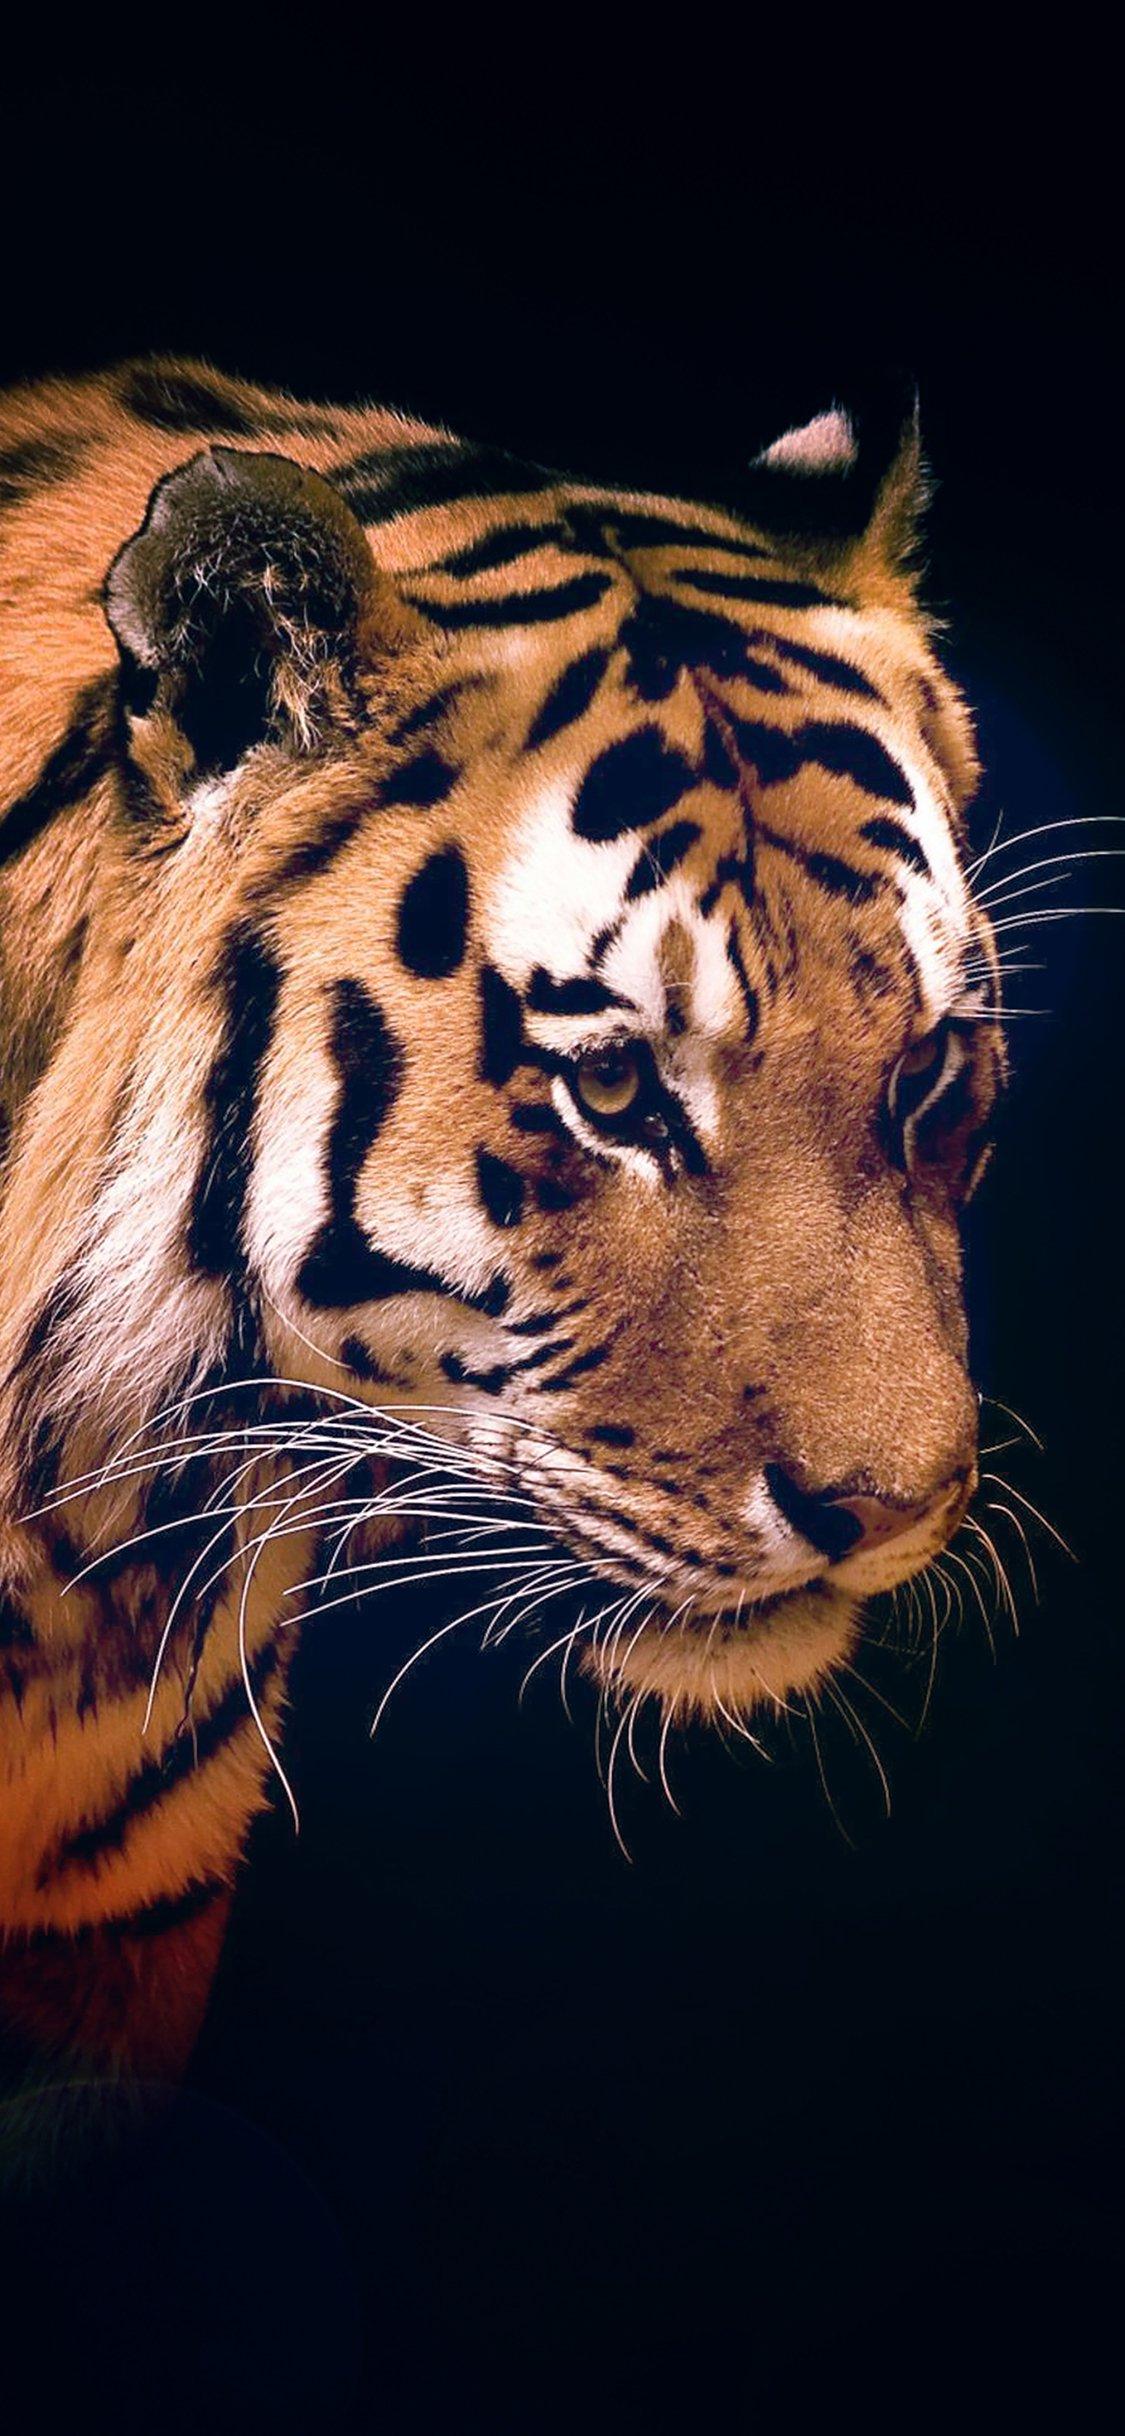 Tiger wallpaper by JDxPRO - Download on ZEDGE™ | 44ca